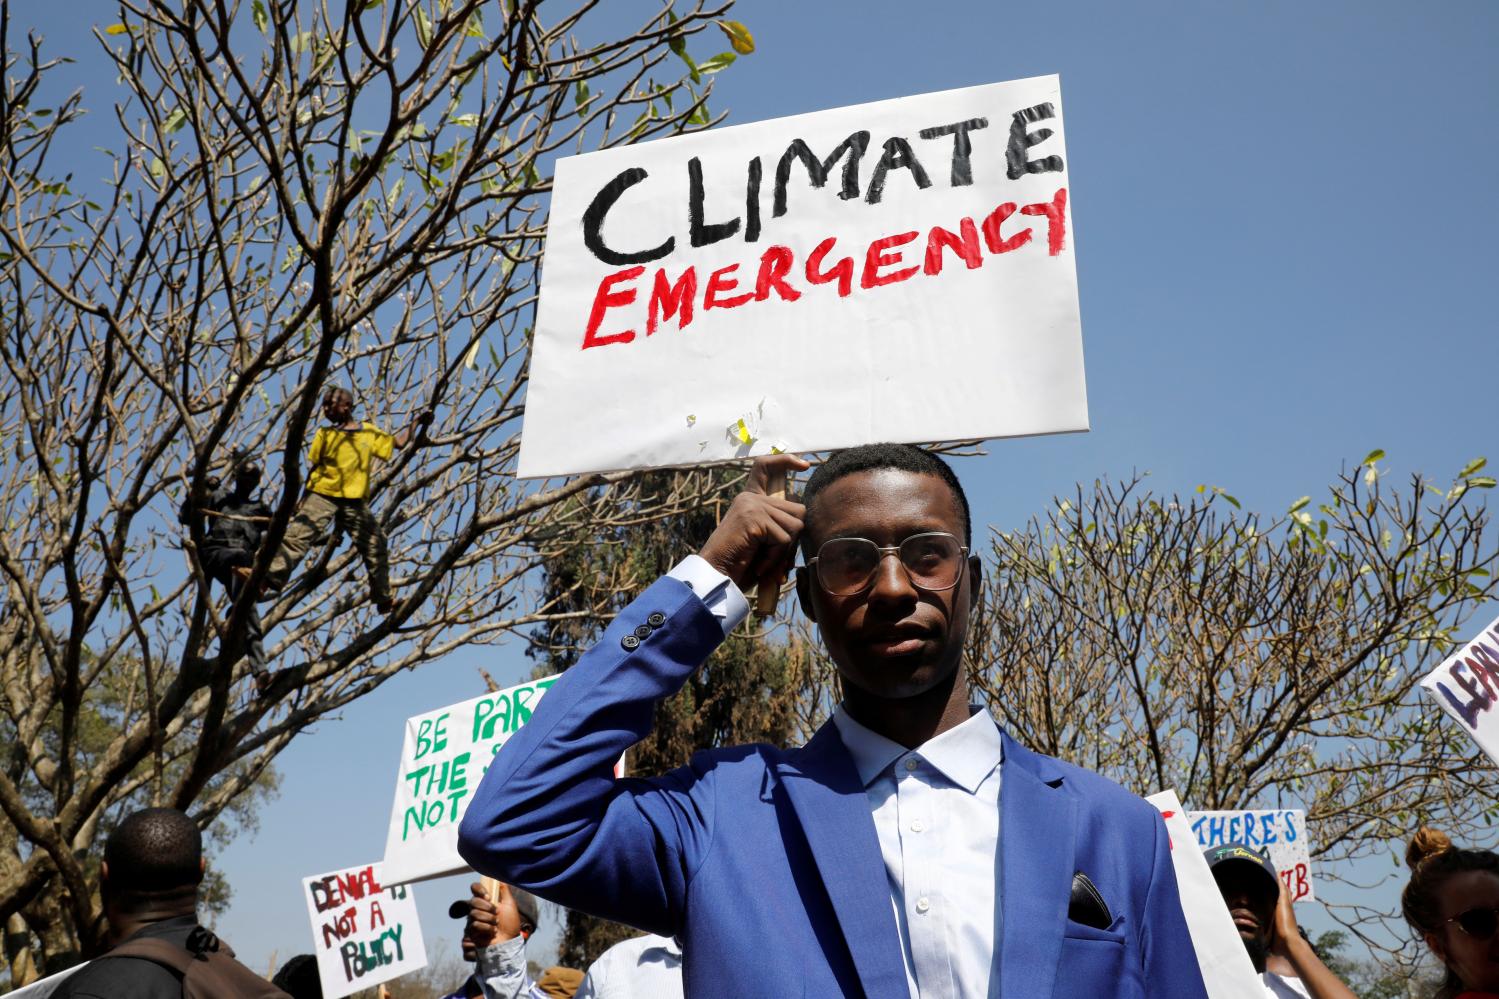 An environmental activist holds a sign as he takes part in the Climate strike protest calling for action on climate change, in Nairobi, Kenya, September 20, 2019. REUTERS/Baz Ratner